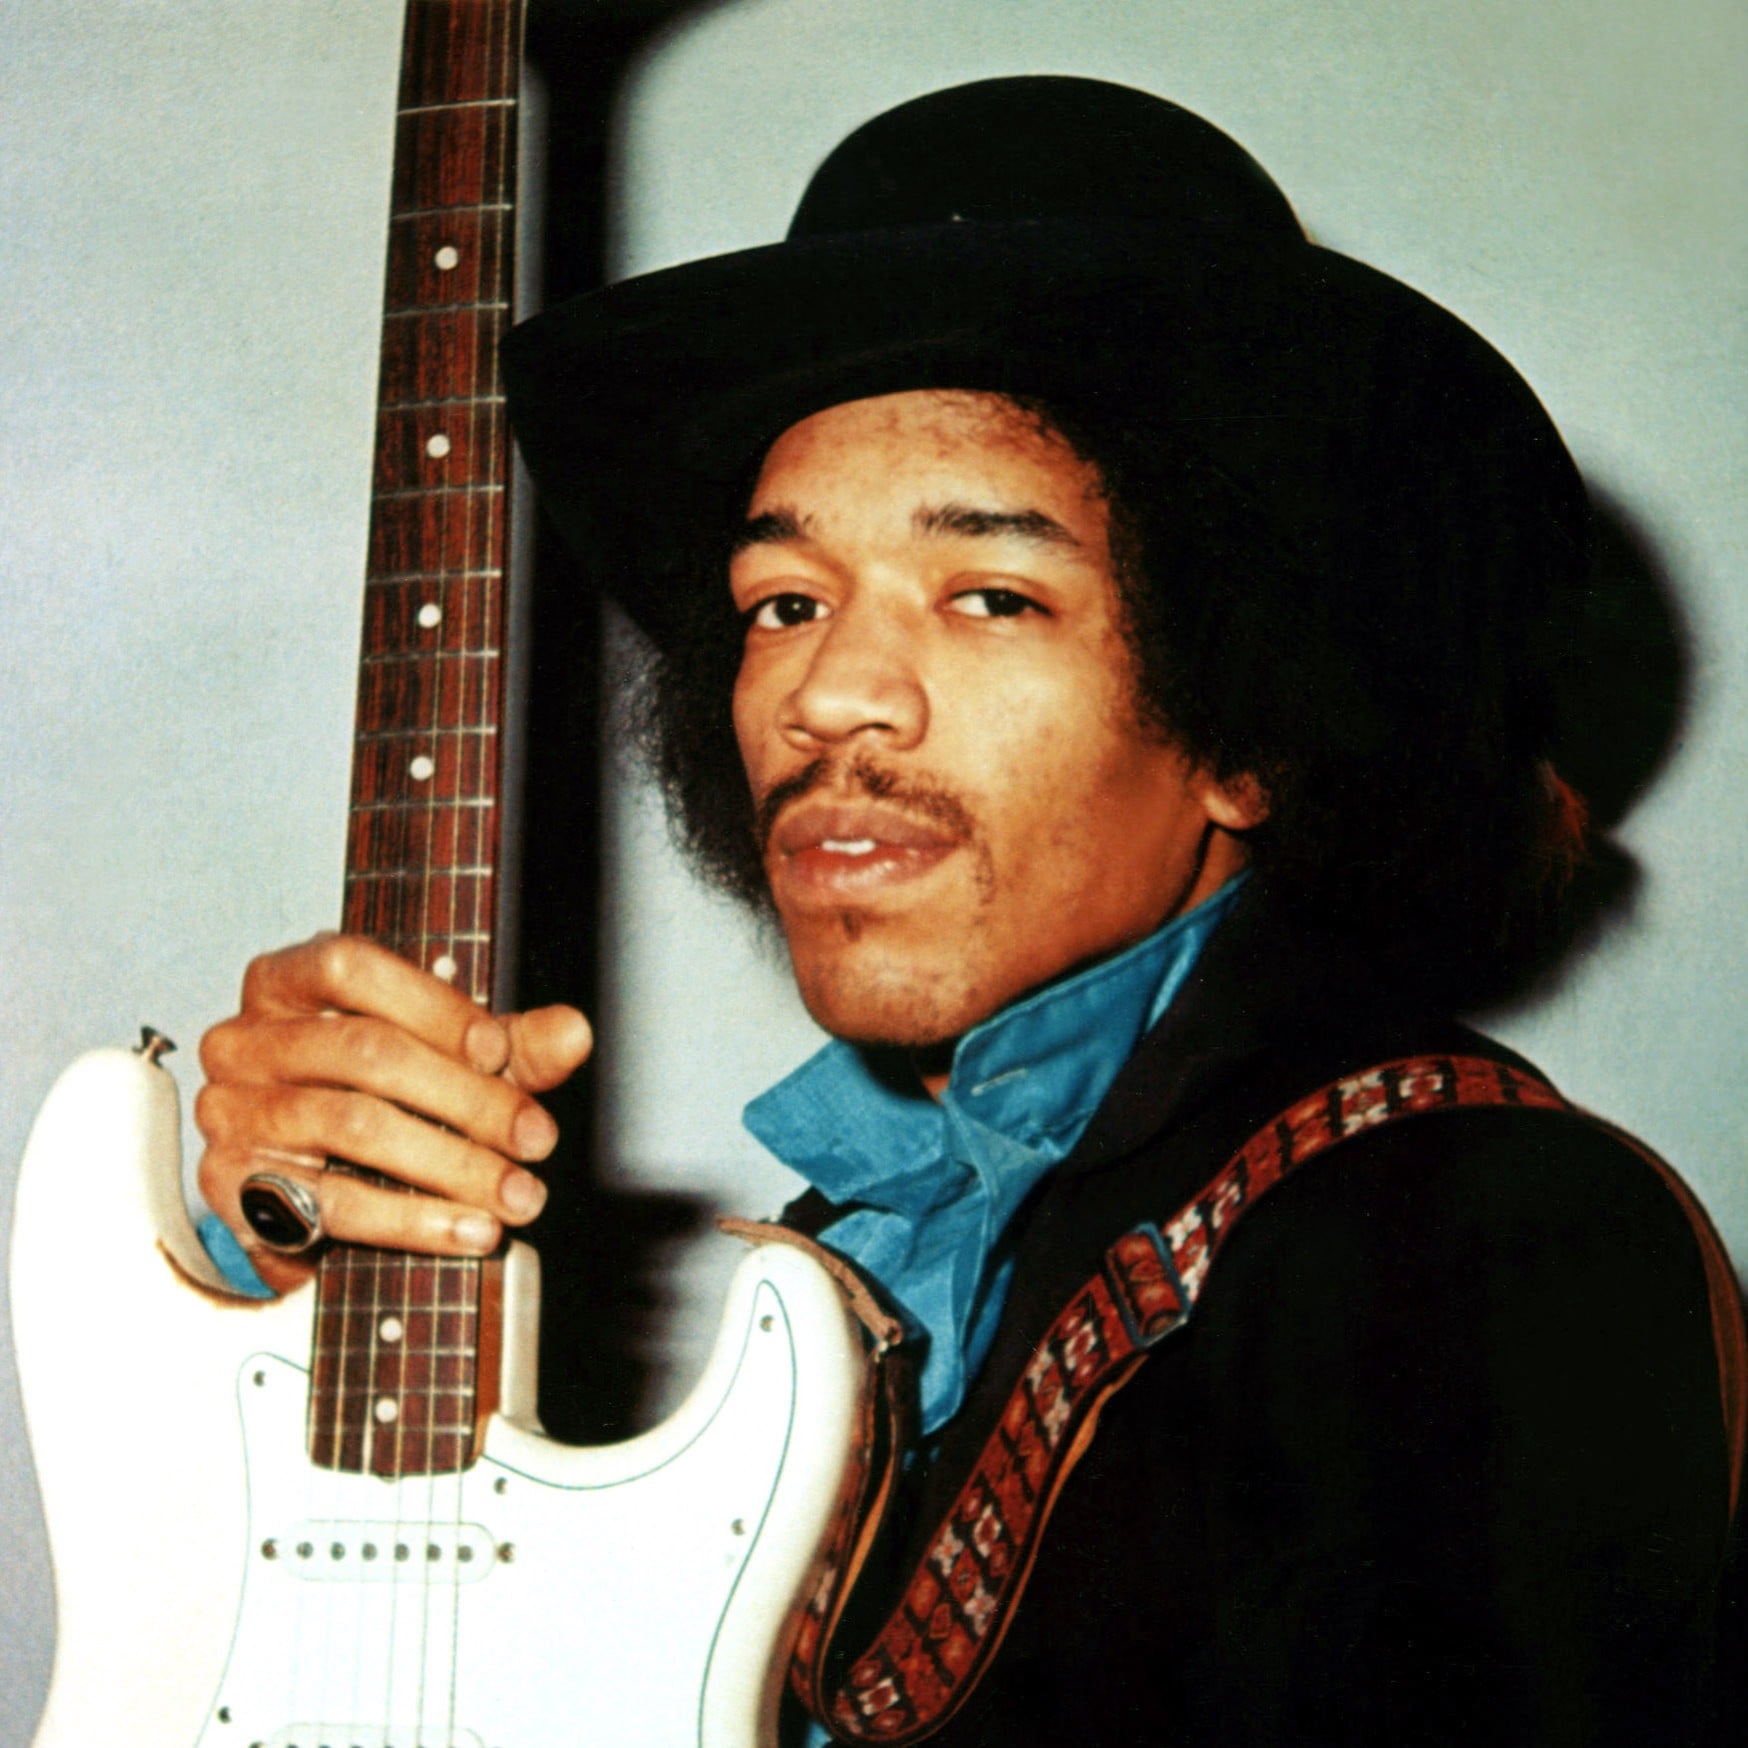 I. Introduction to Jimi Hendrix and his impact on electric guitar